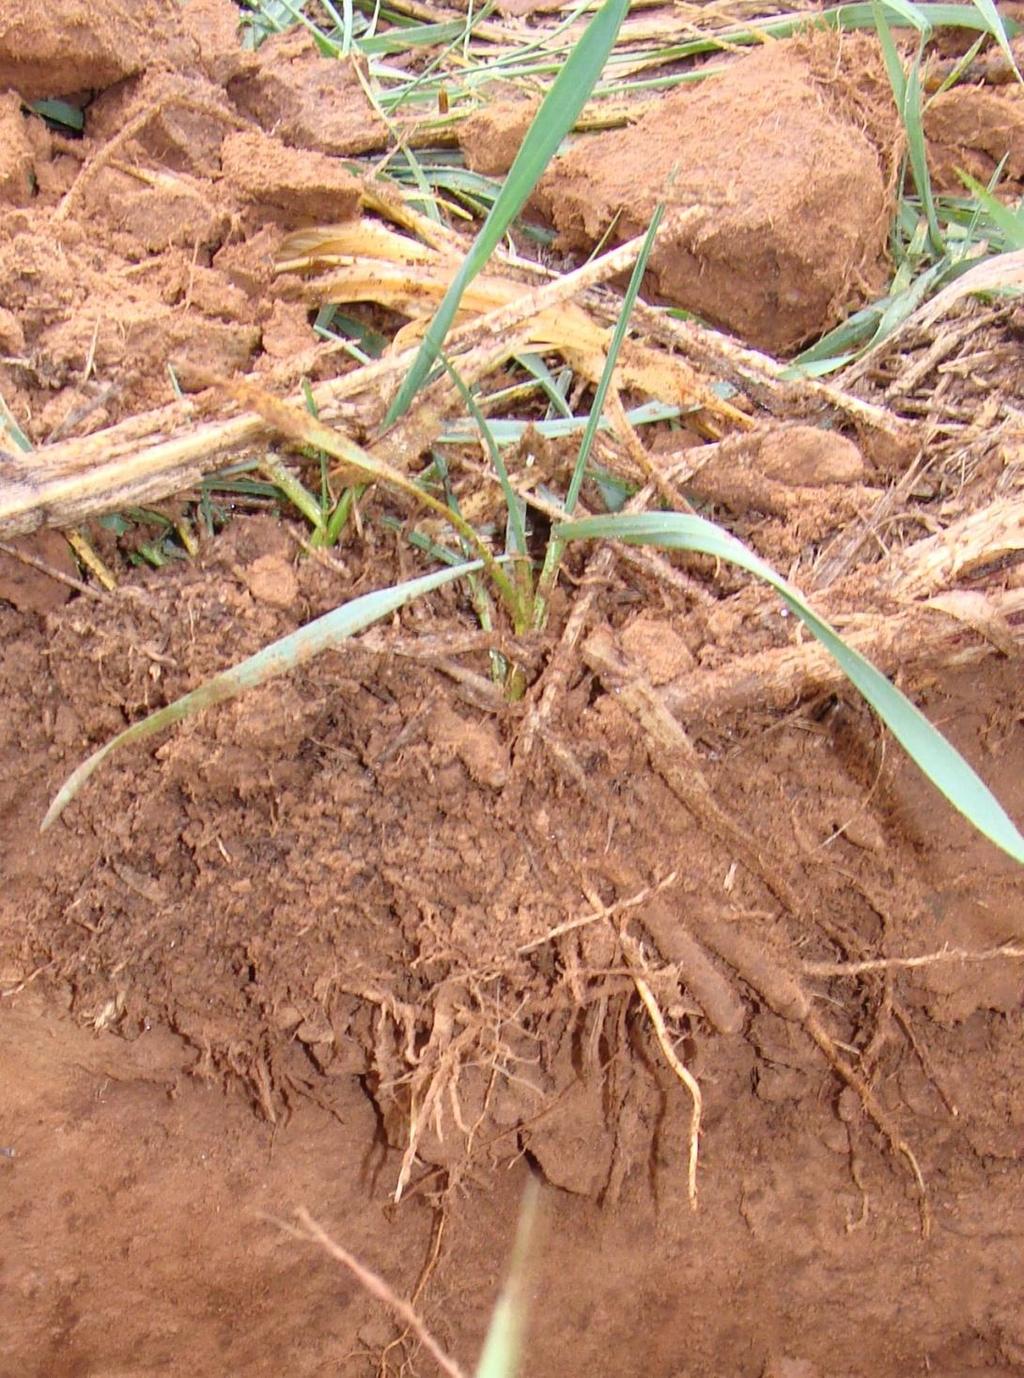 Soil Structure Sorghum Sudan roots in grazed wheat field in Kingfisher